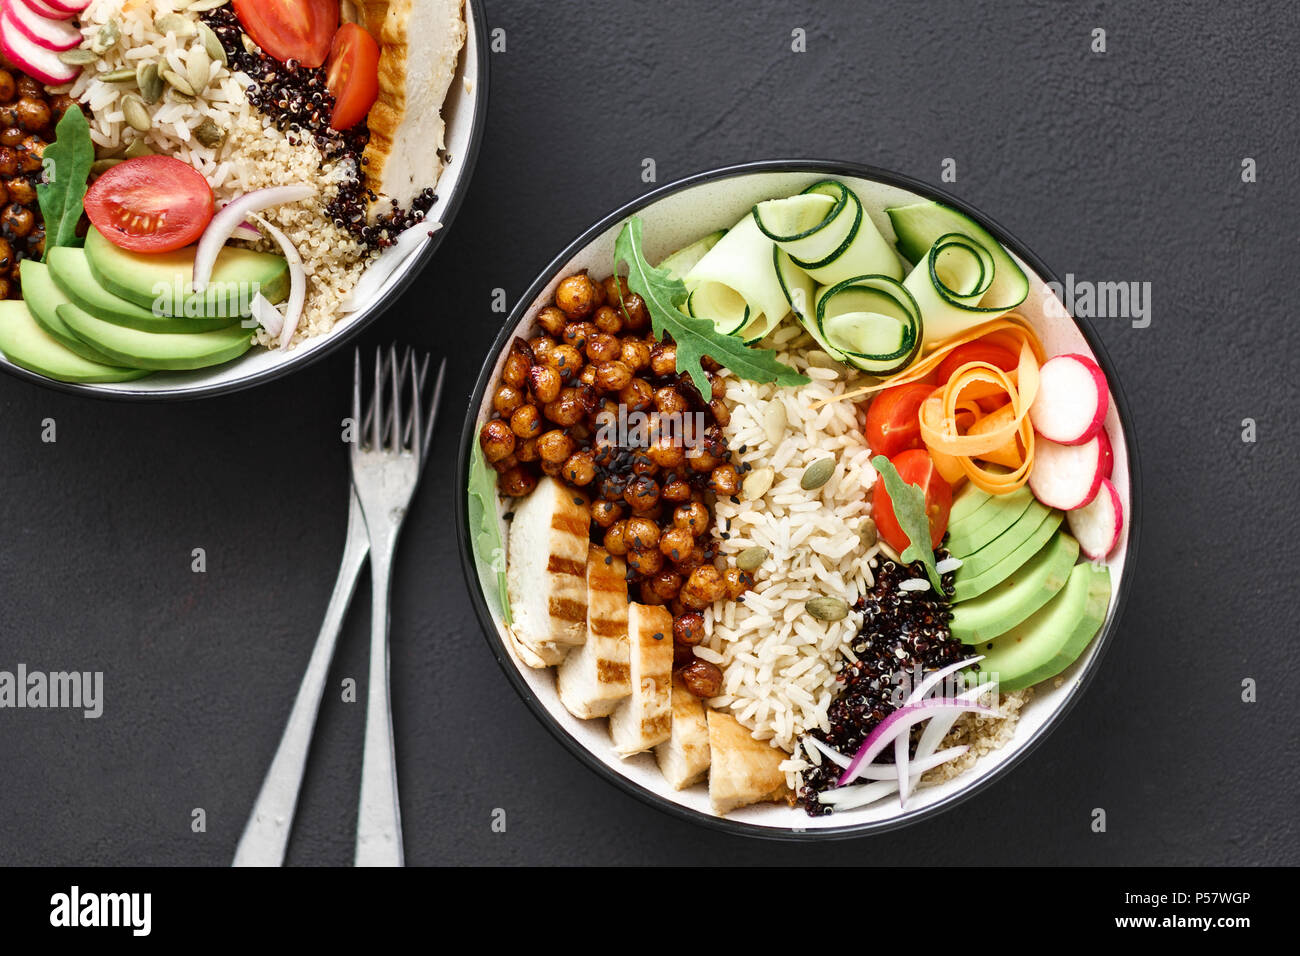 Healthy clean and balanced eating concept. Chicken grilled steak, rice, spicy chickpeas, black and white quinoa, avocado, carrot, zucchini, radish, to Stock Photo